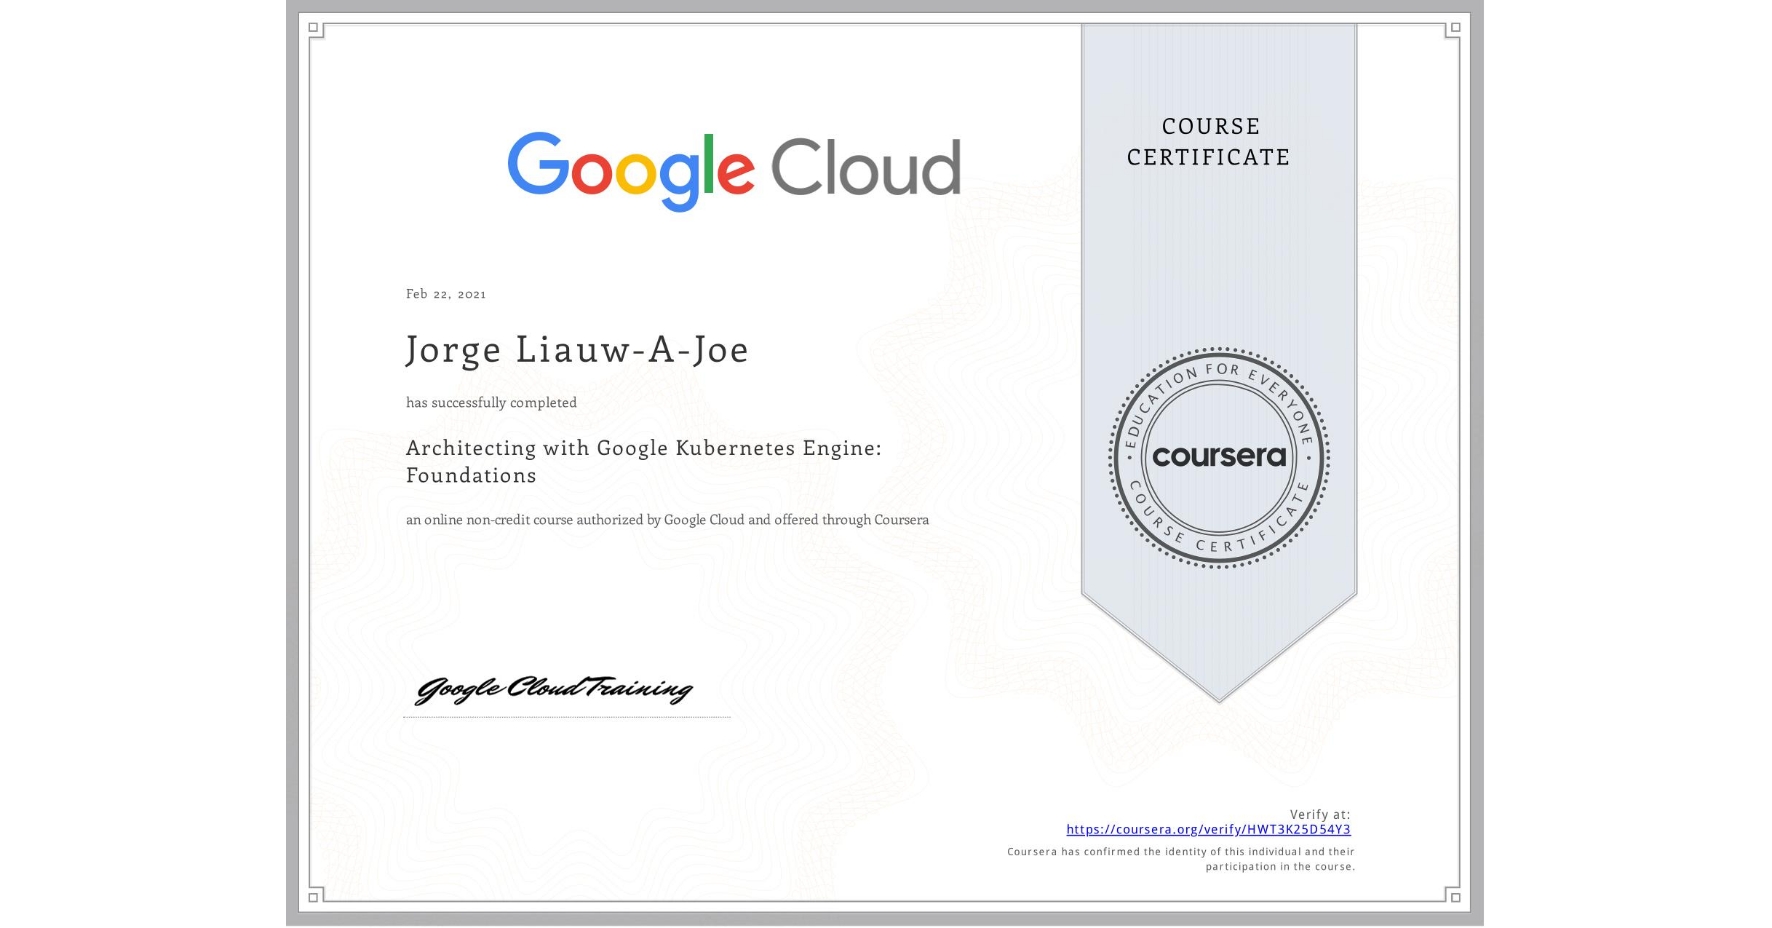 View certificate for Jorge Liauw-A-Joe, Architecting with Google Kubernetes Engine: Foundations, an online non-credit course authorized by Google Cloud and offered through Coursera